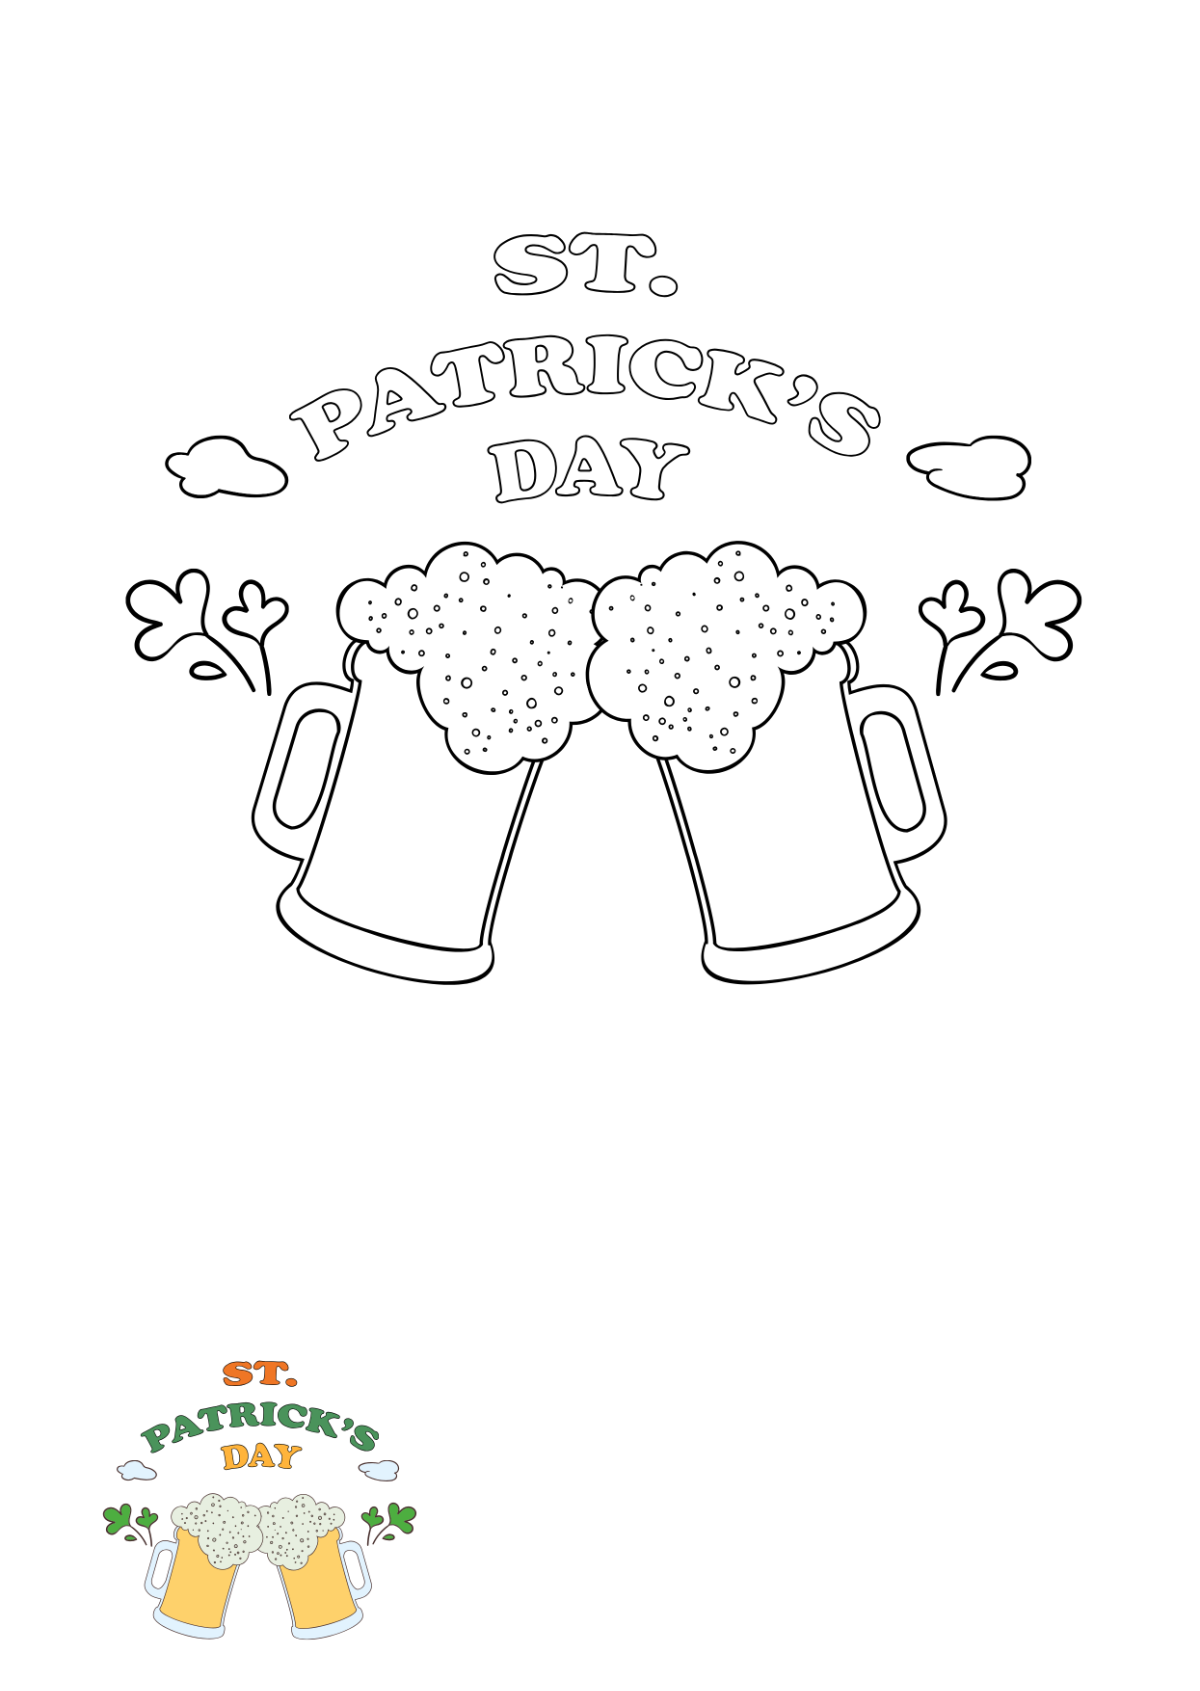 Simple St. Patrick’s Day Coloring Page